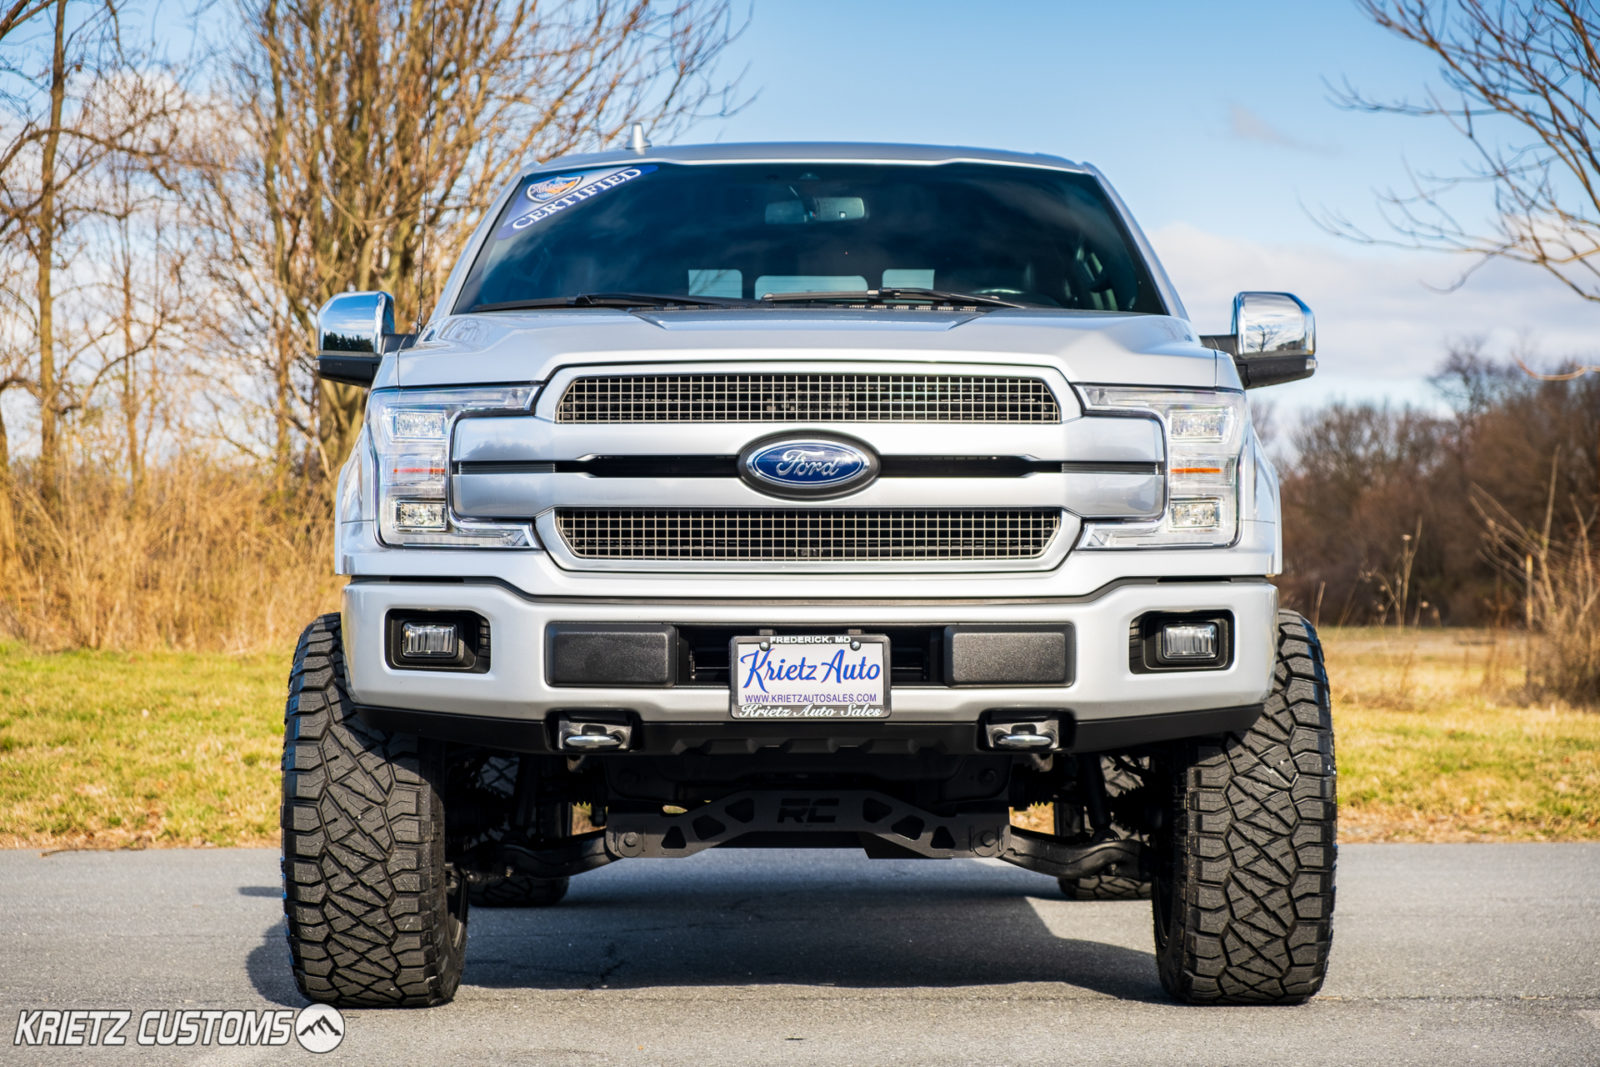 Lifted 2019 Ford F-150 with 22×12 Fuel Blitz and a 6 inch Rough Country